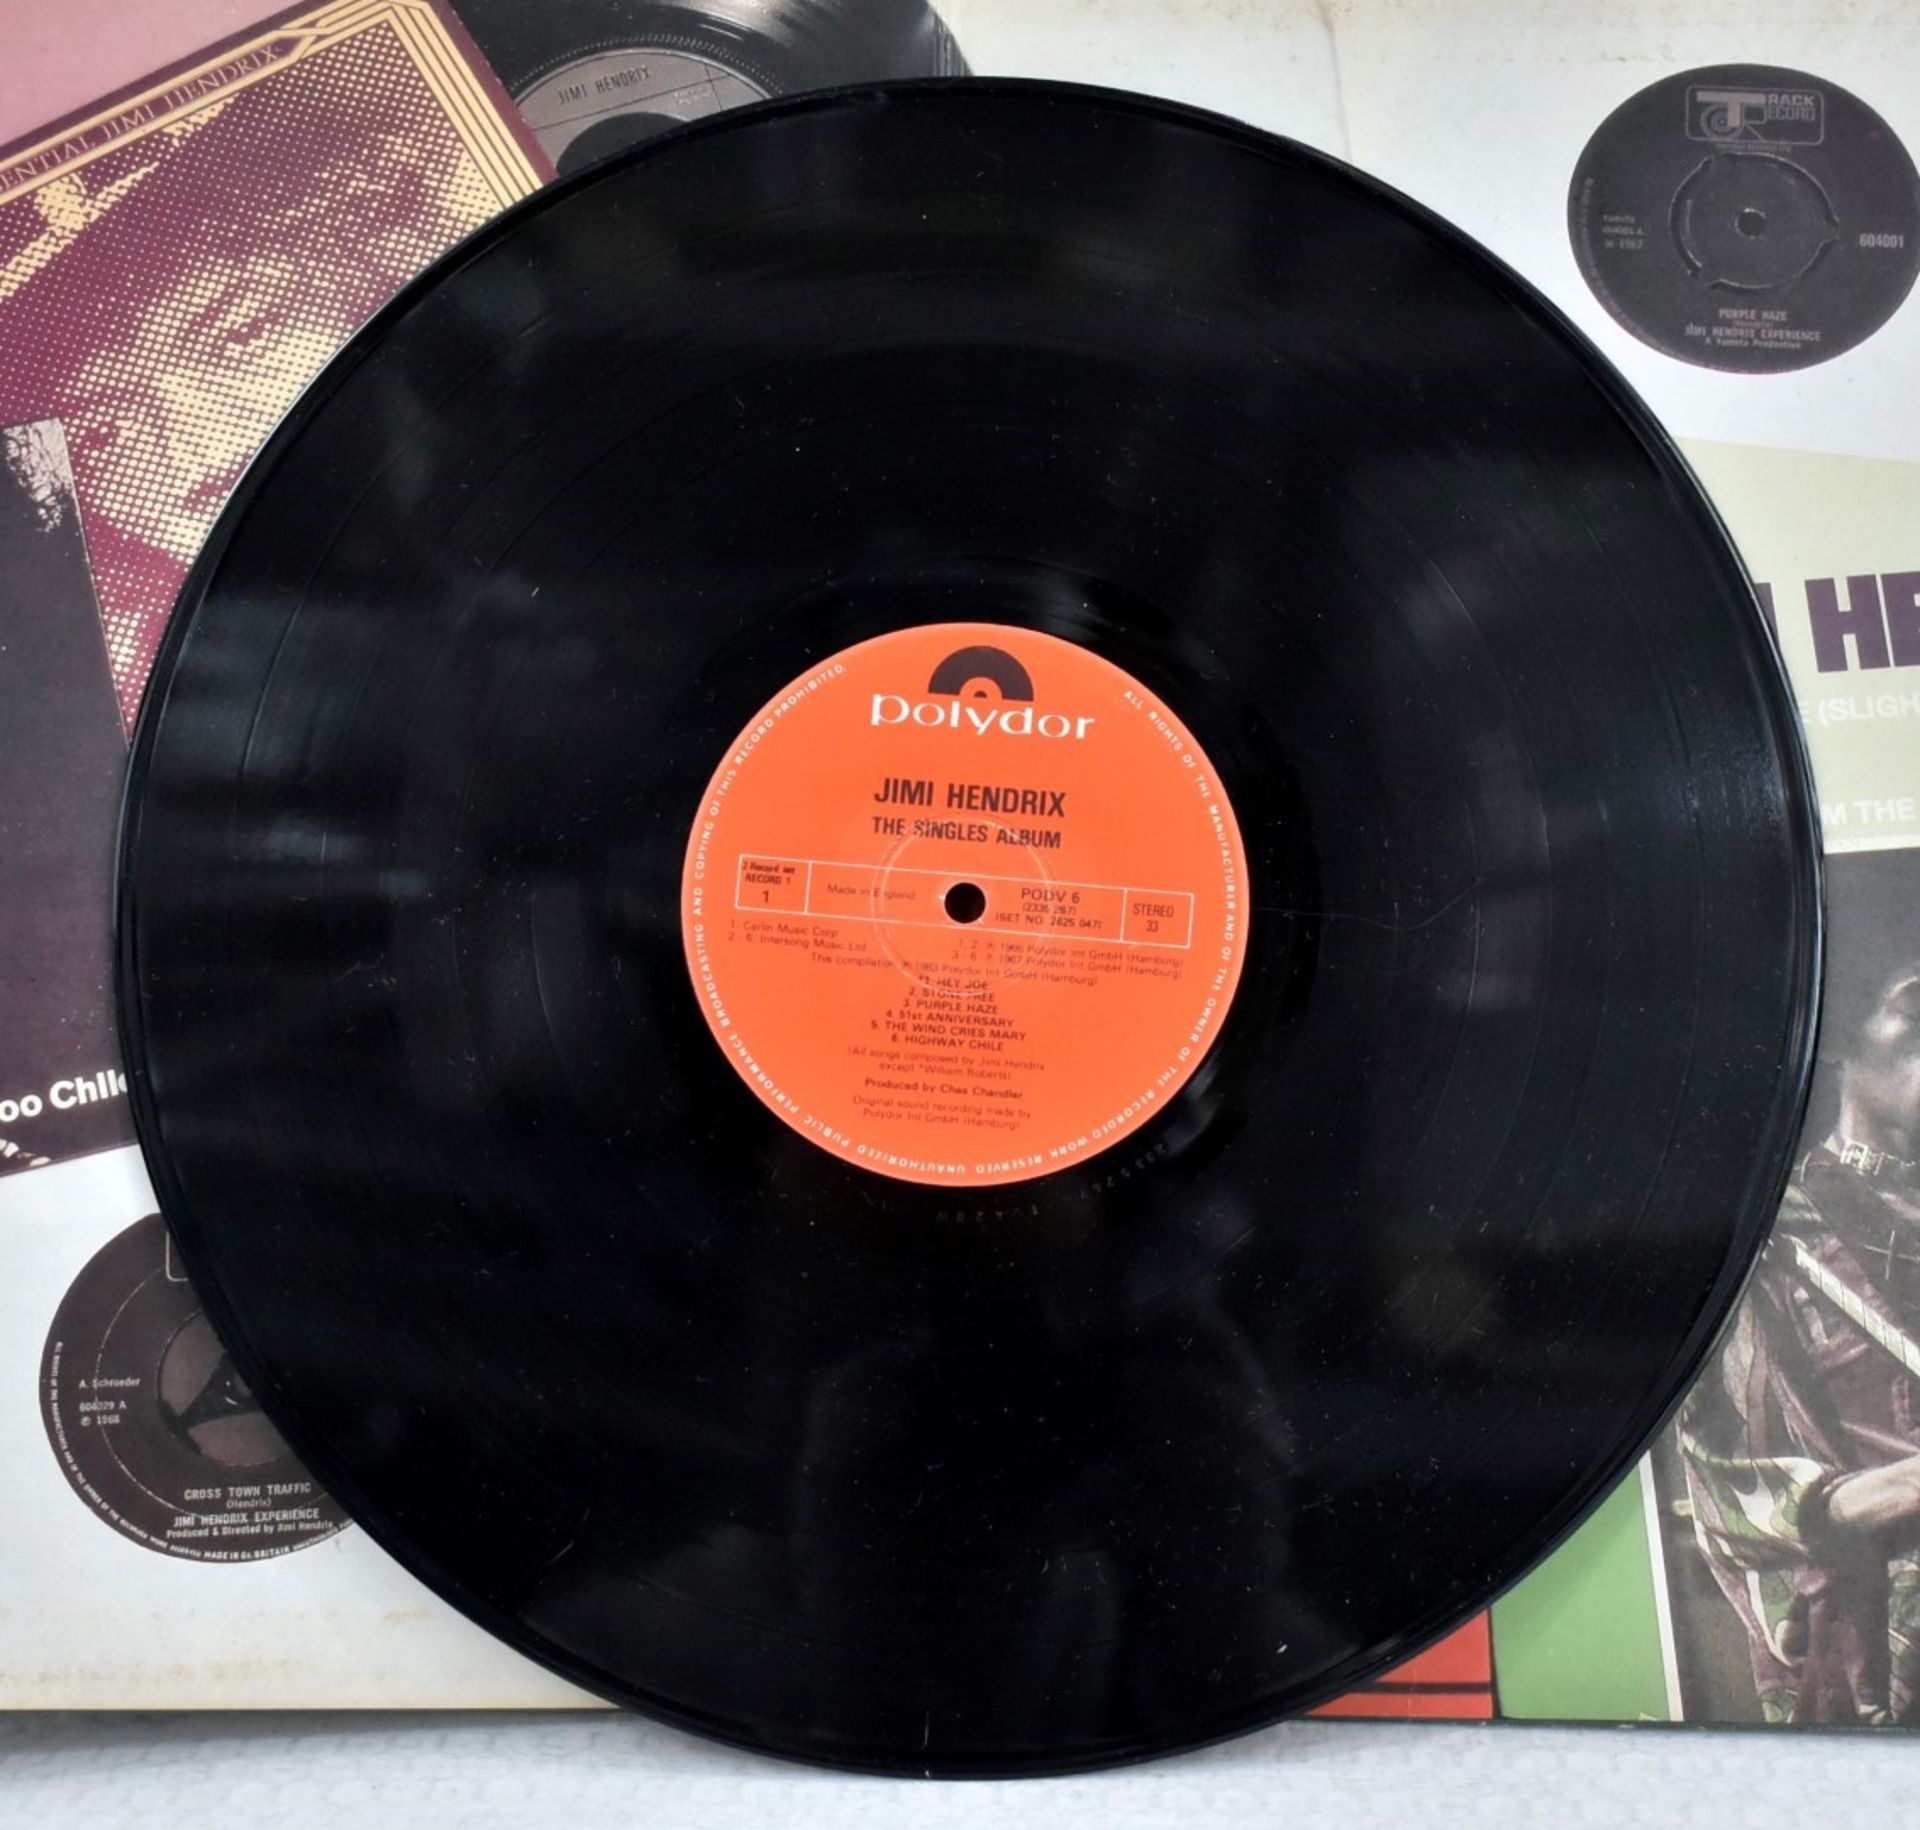 1 x JIMI HENDRIX The Singles Album Polydor Records Limited 1983 2 Double Sided 12 Inch Vinyls - - Image 13 of 22